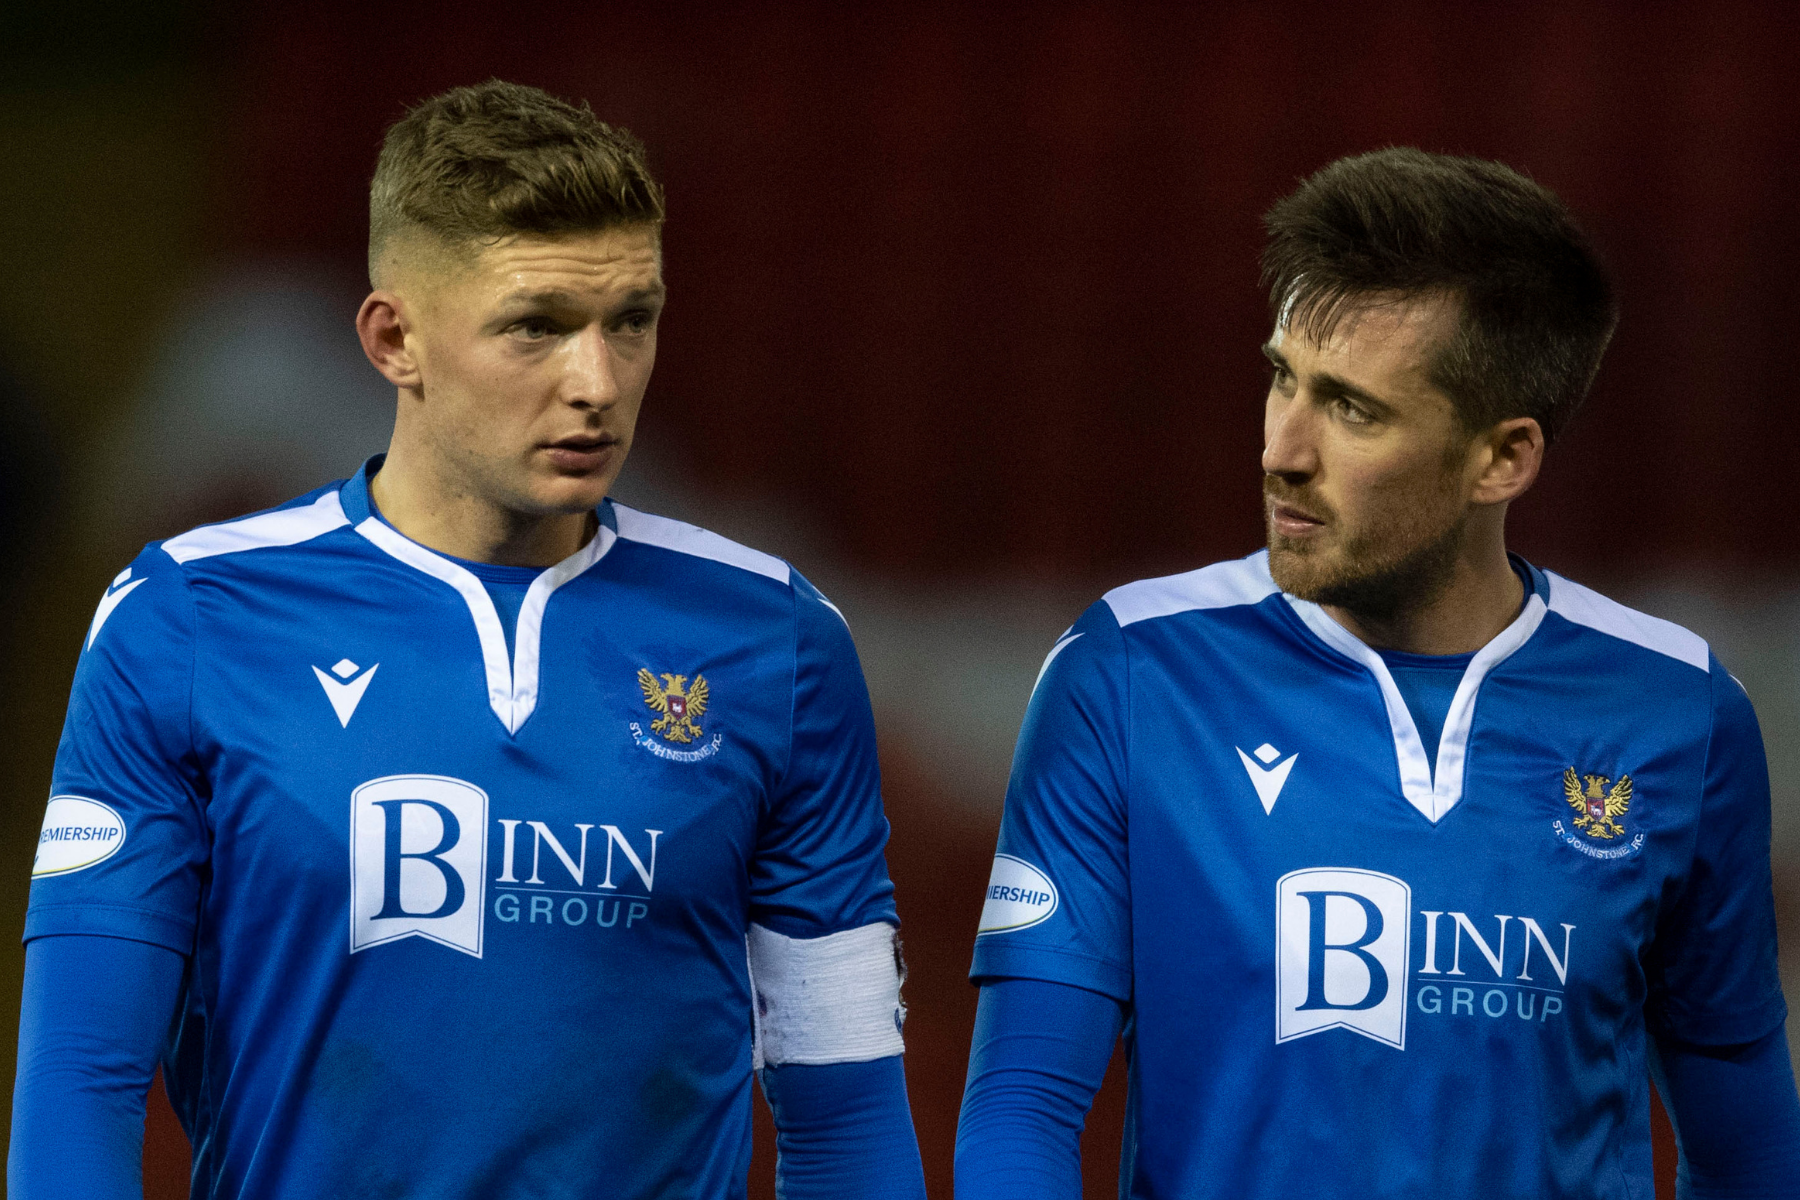 St Johnstone will take on Dundee United 'like it’s the biggest derby of our lives', says Liam Gordon